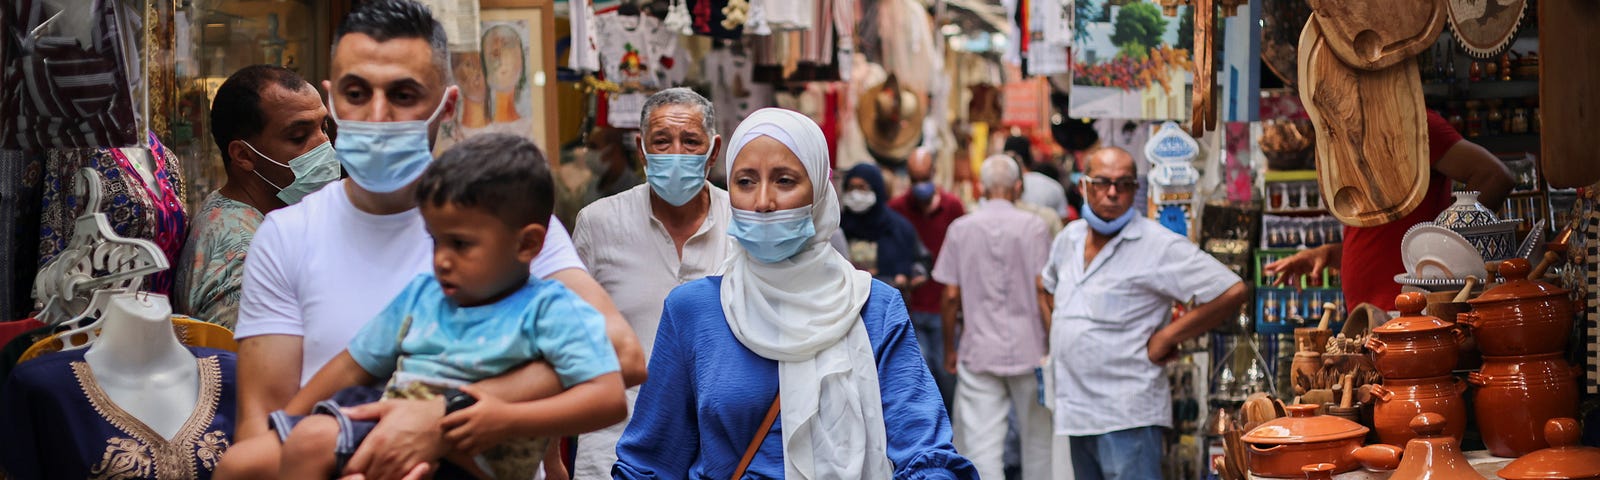 People wearing face masks walk past shops amid the COVID-19 outbreak in the Old City of Tunis, Tunisia, August 3, 2021. Photo by Ammar Awad/Reuters